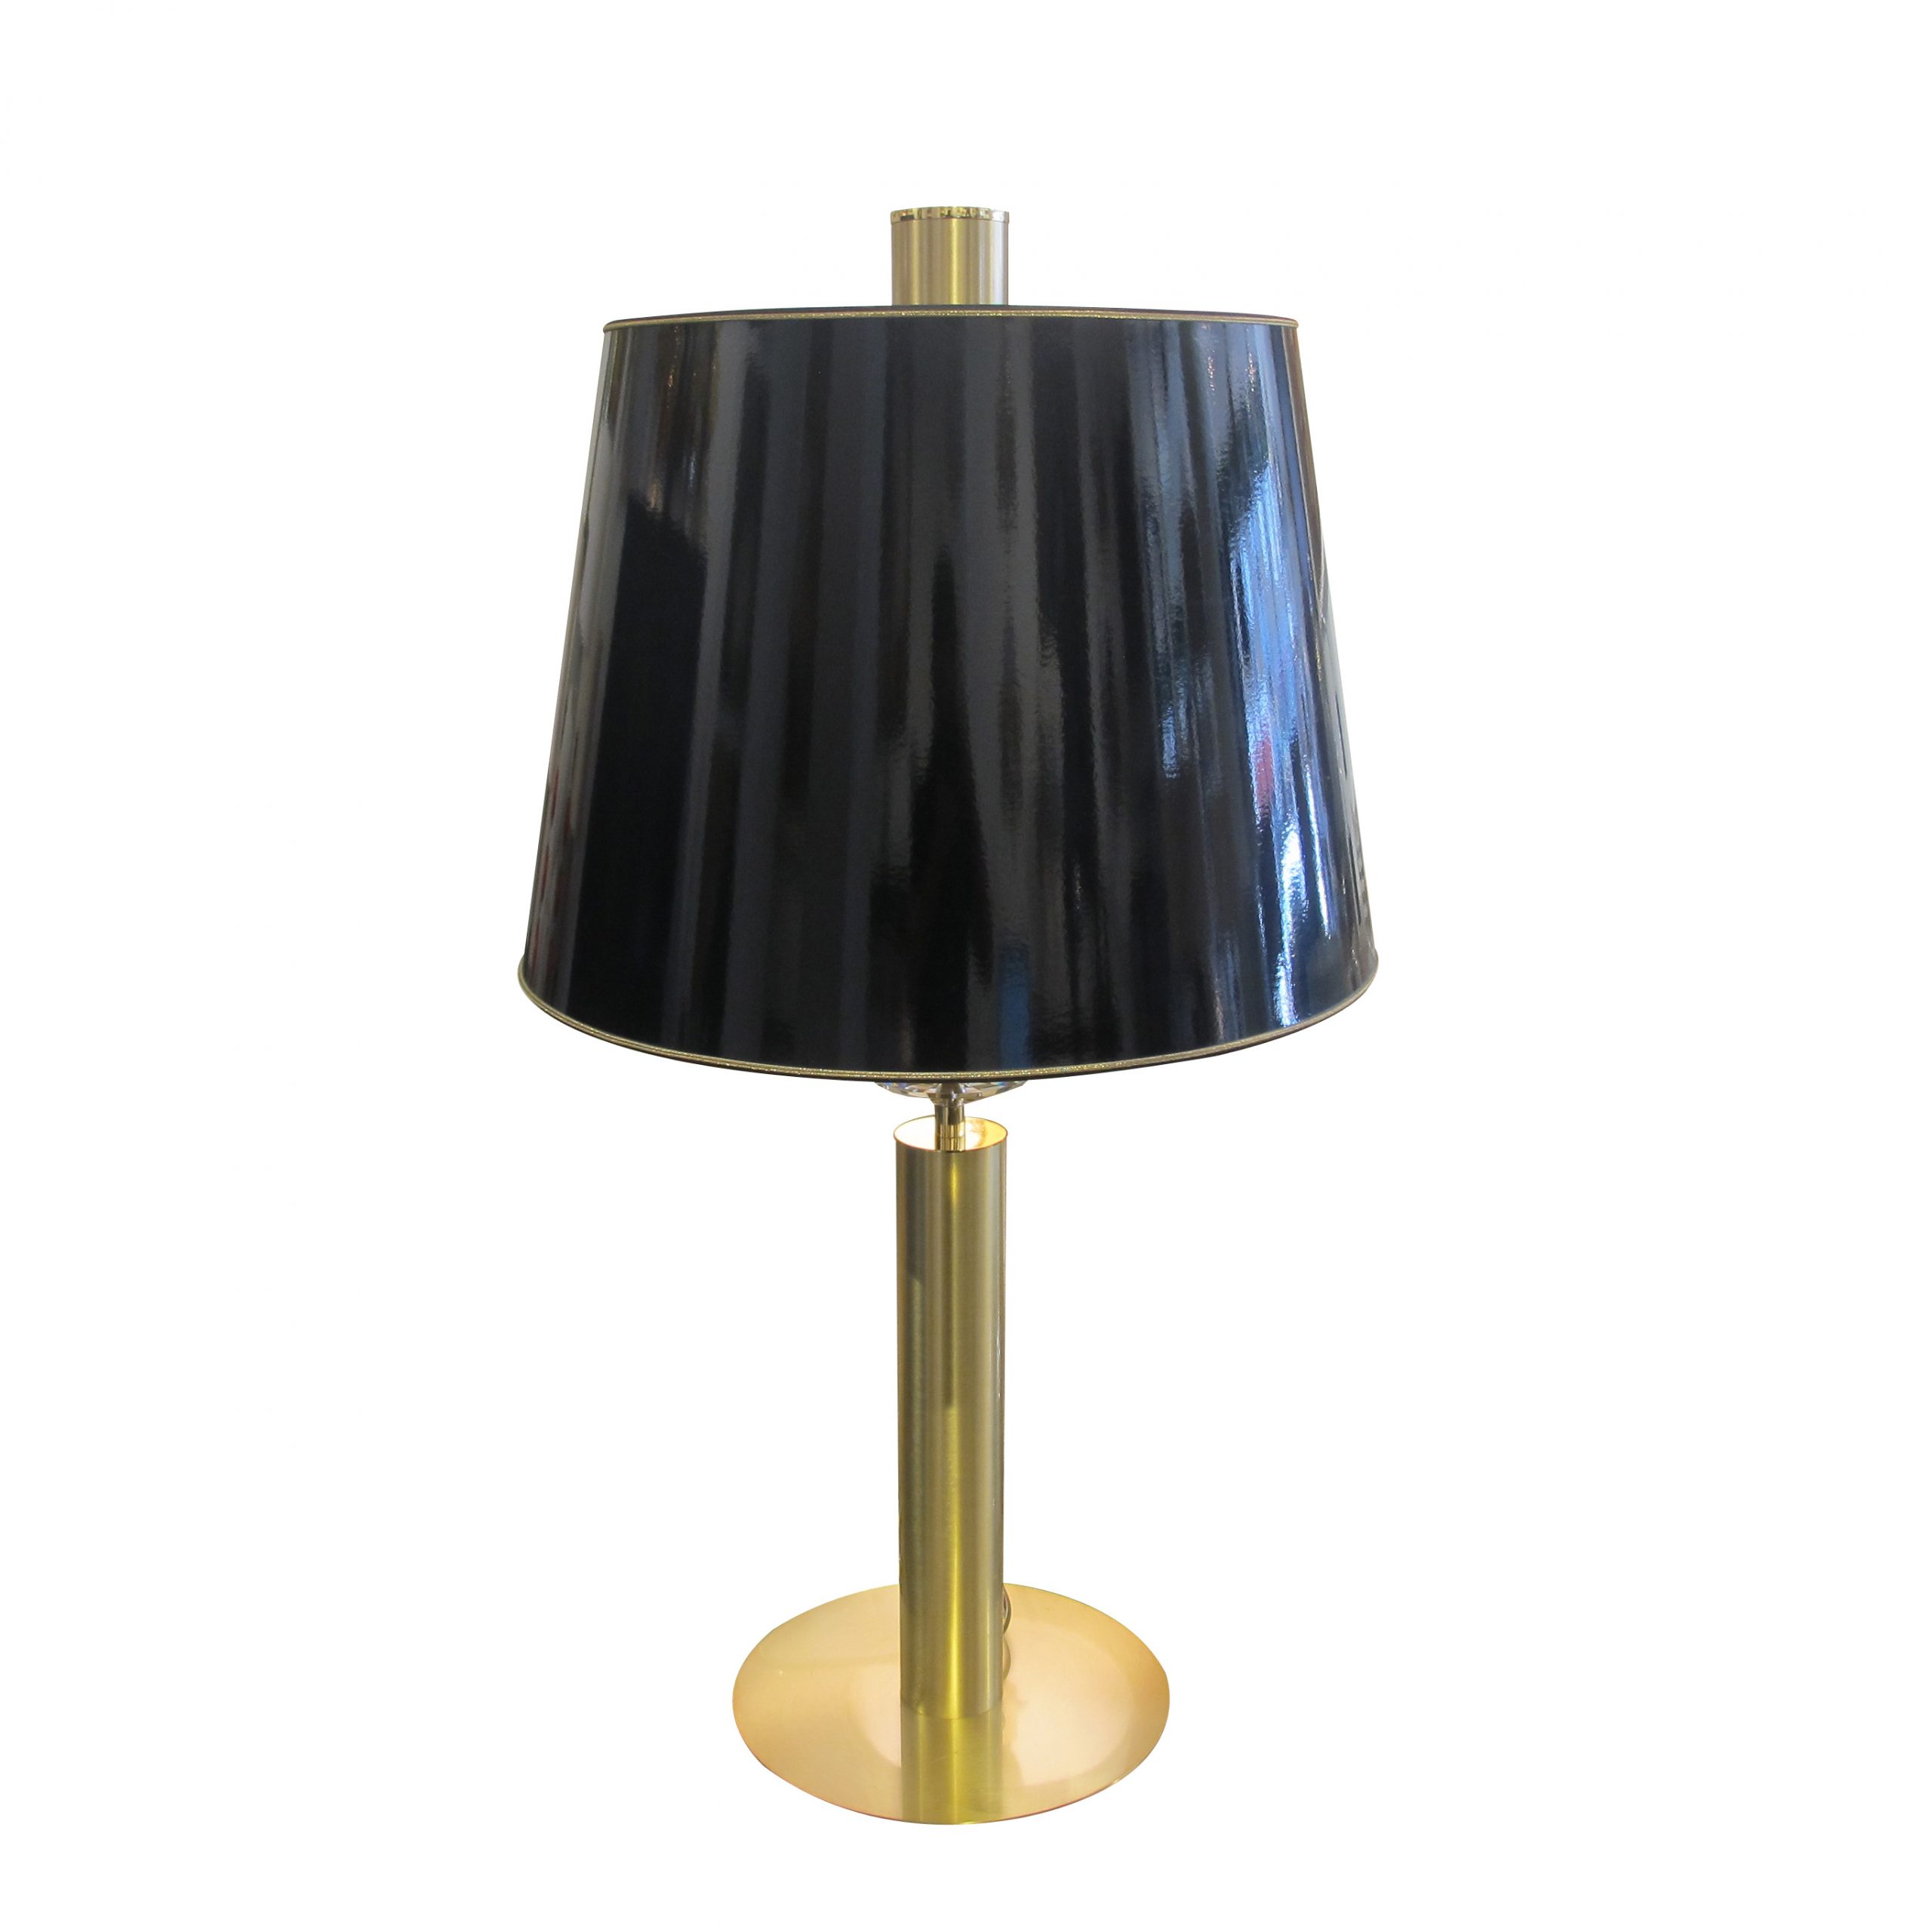 A very large pair of brass table lamps - Les Trois Garcons Interiors